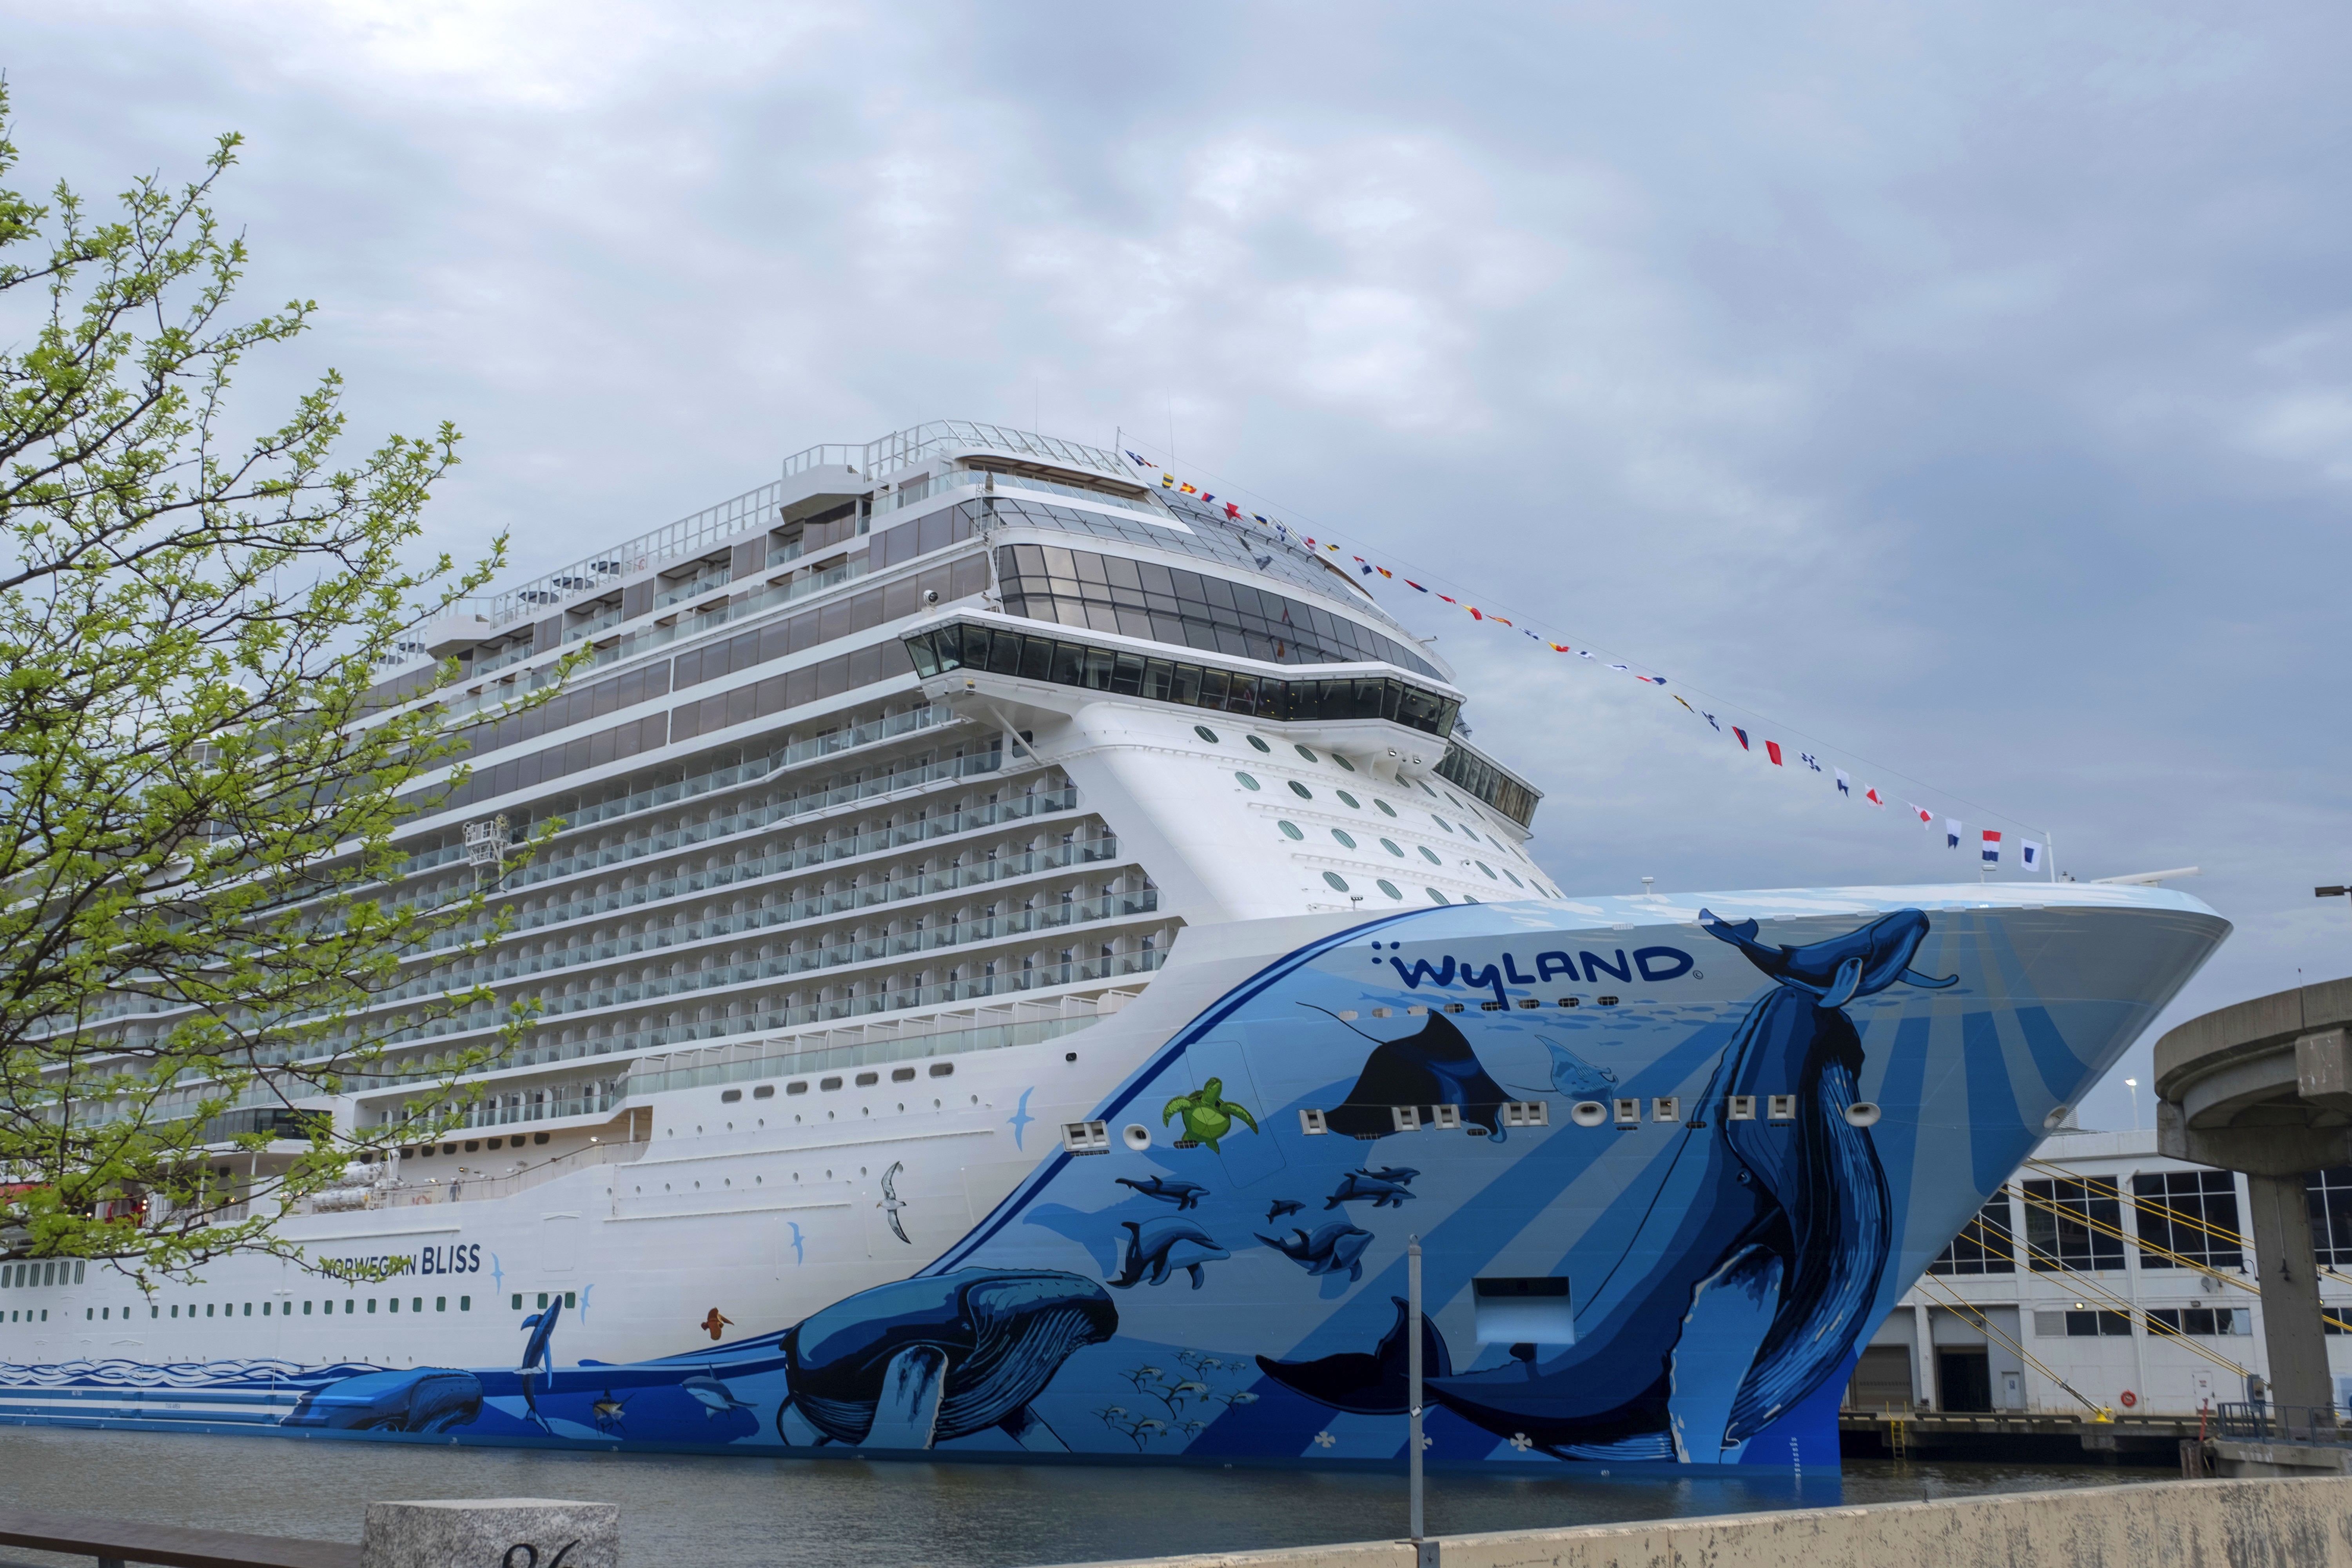 Norwegian Cruise Line’s newest luxury ship will sail to Alaska and Caribbean and target booming industry set to attract over 27 million travellers this year